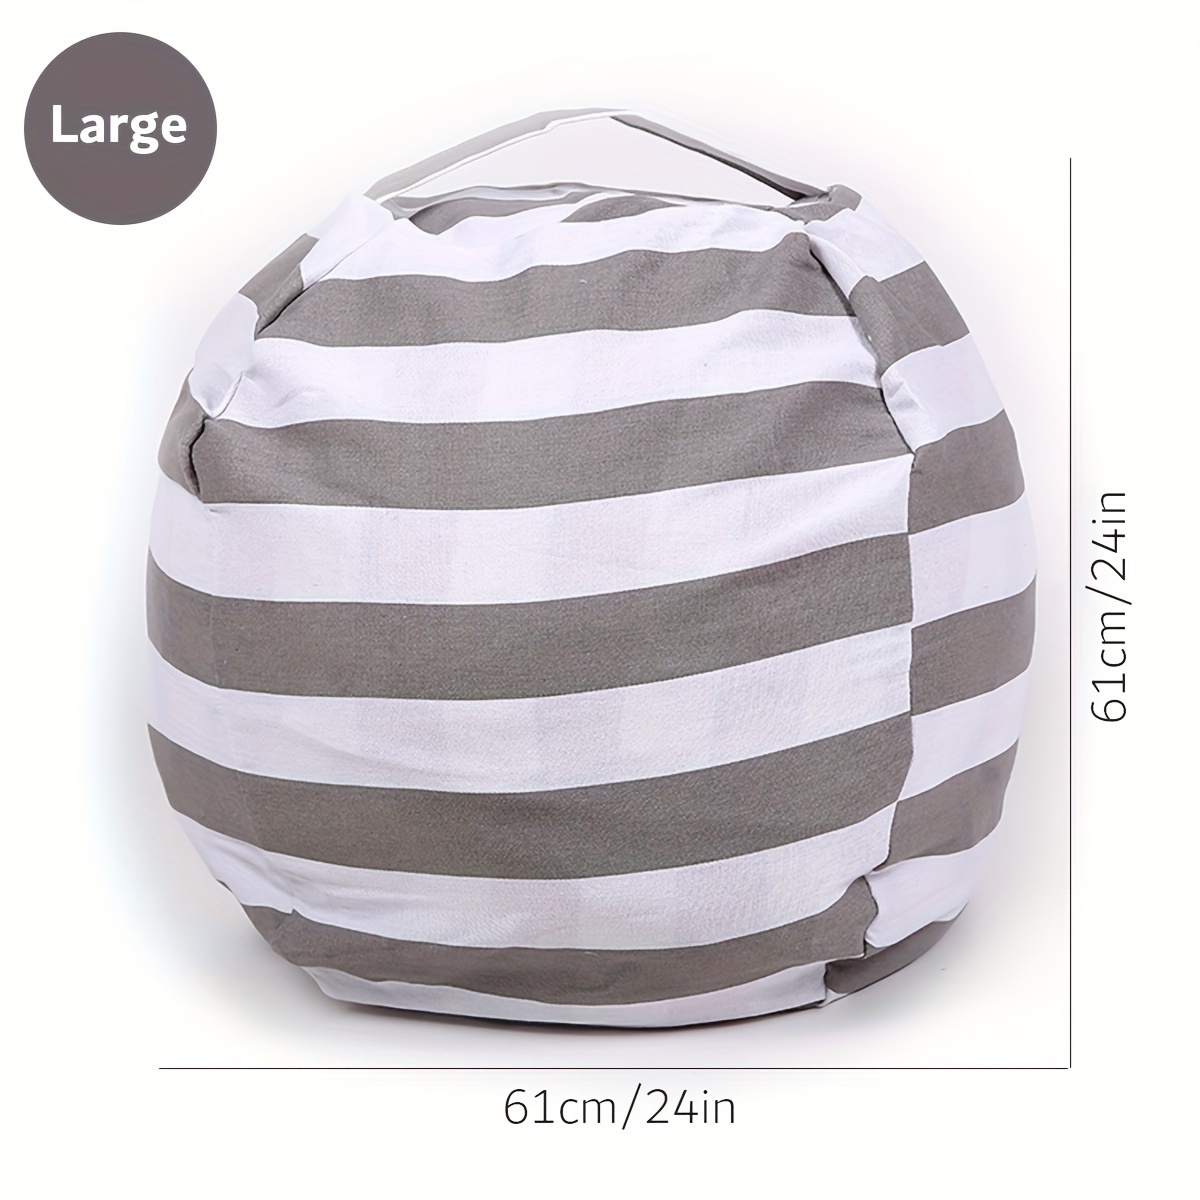  Stuffed Animal Storage Beanbag Cover - 55 Extra Large Bean Bag  Chair, Stripe Grey by Loungie : Home & Kitchen